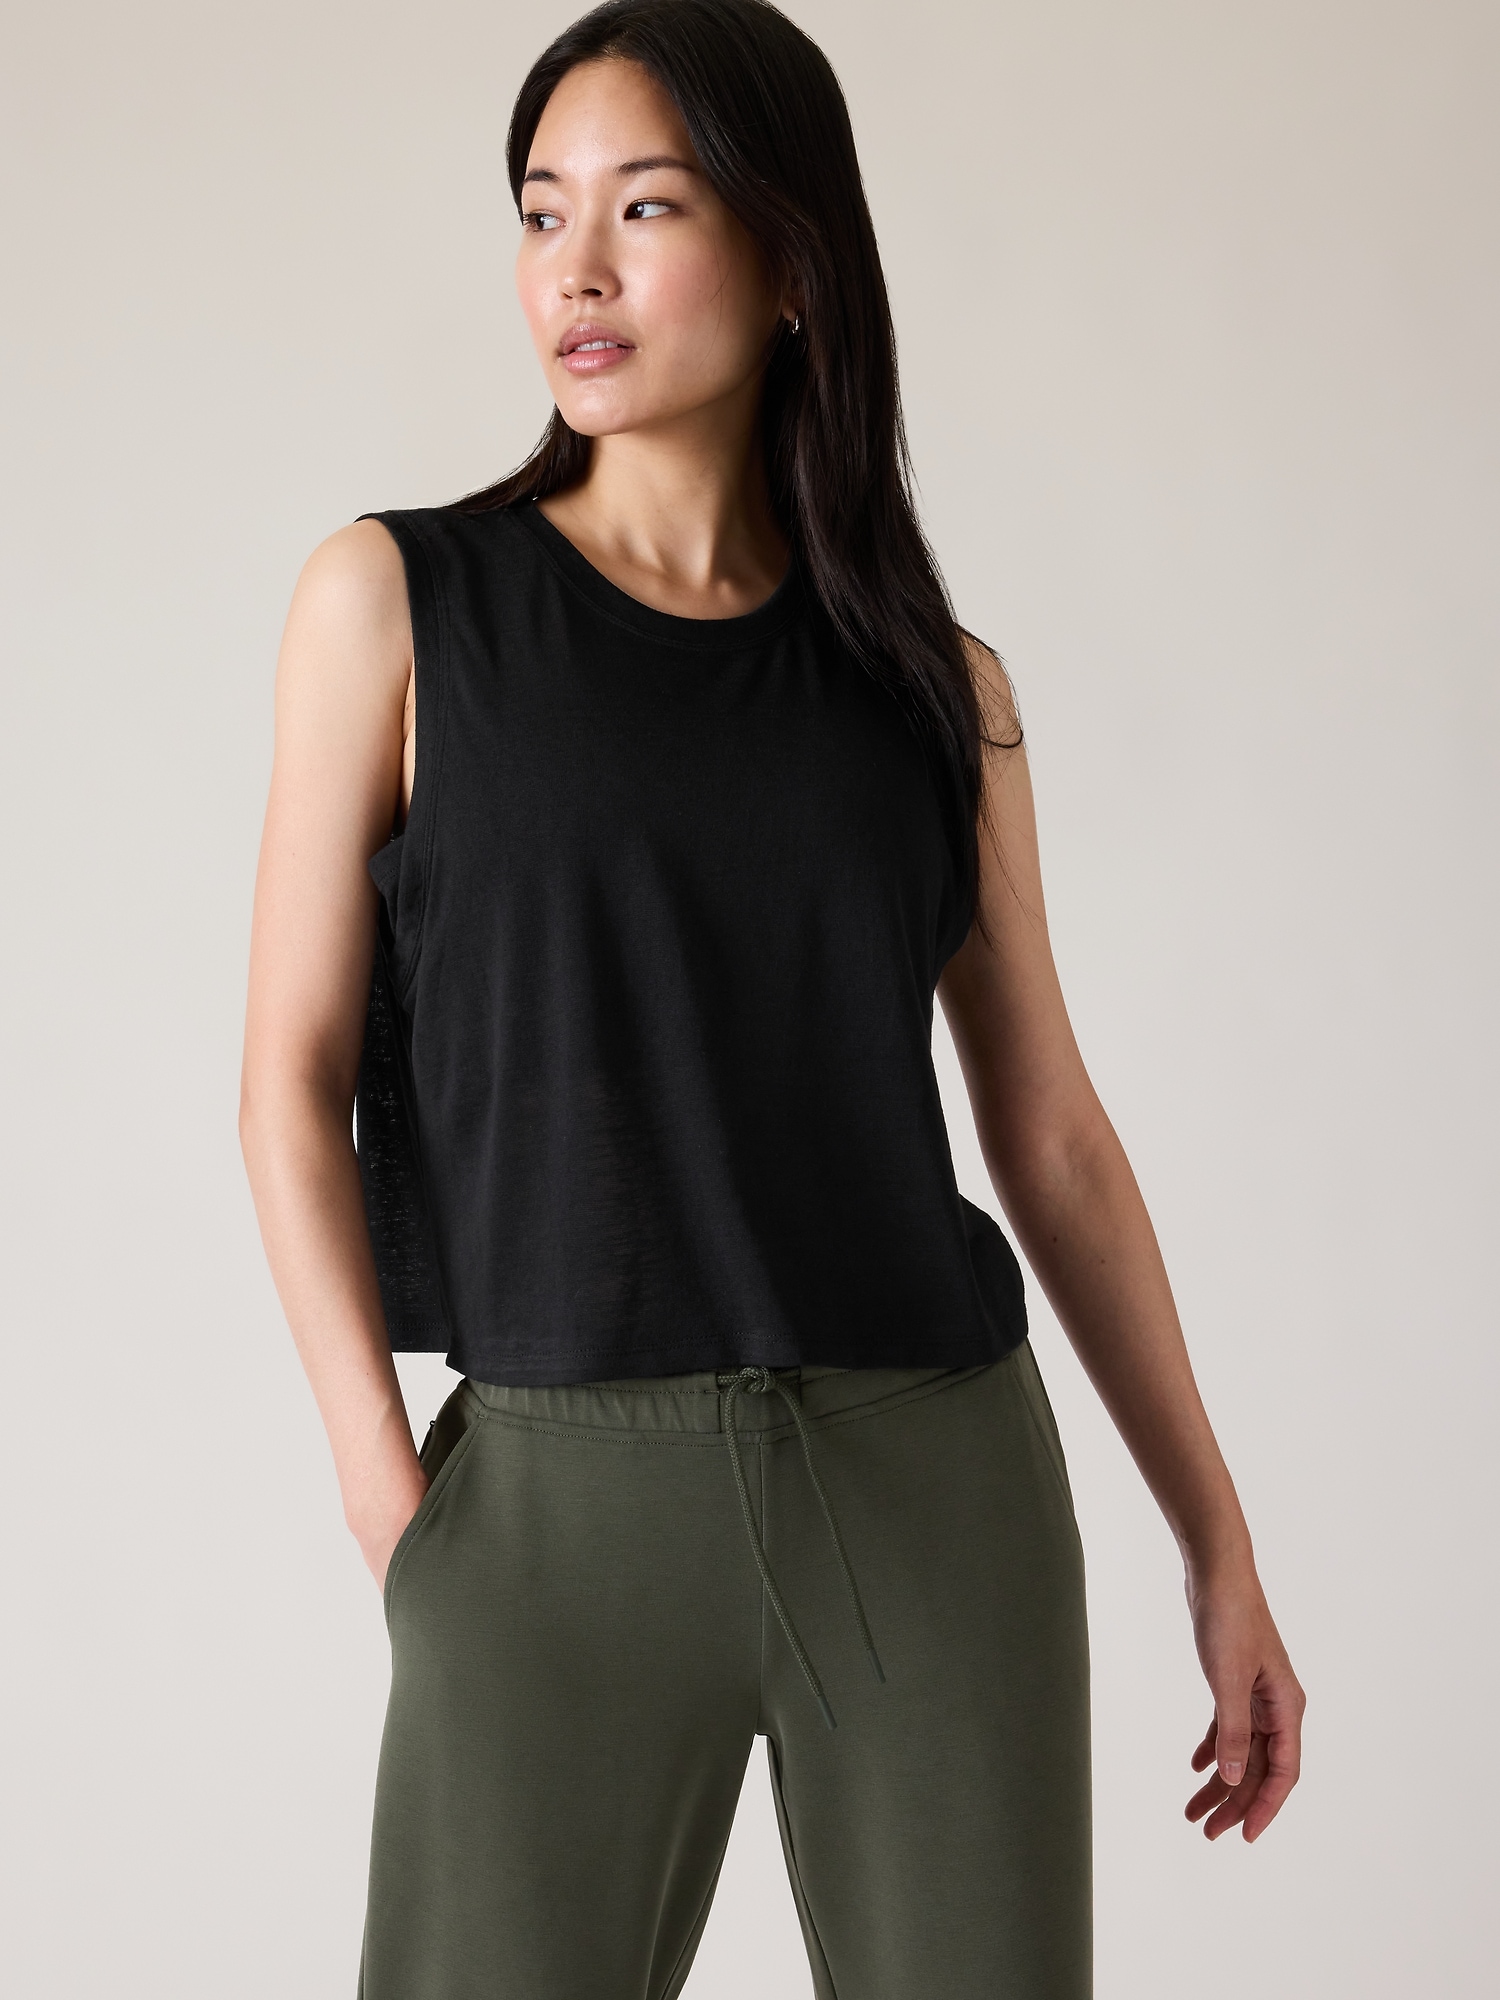 Women's Scoop Neck Sweater Tank Top - A New Day™ Olive Green M